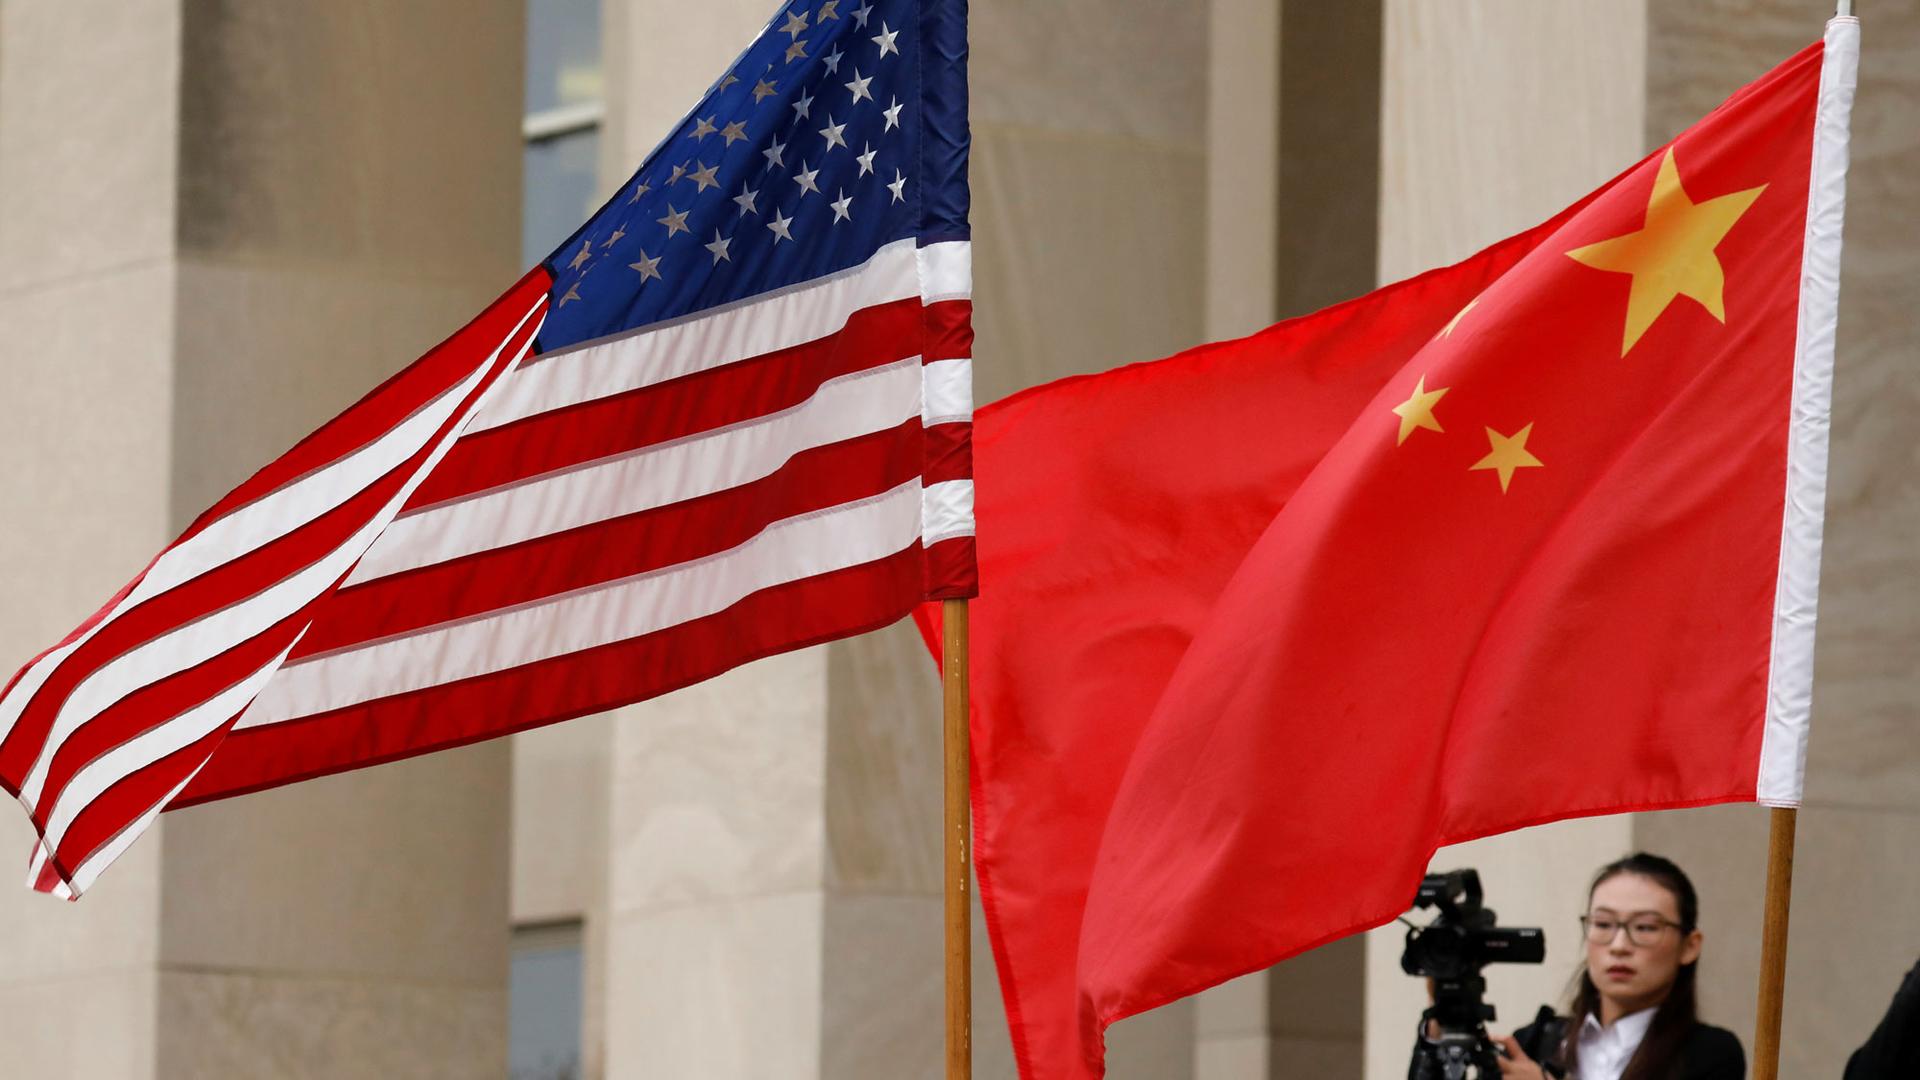 US and Chinese flags are showing flying with a photographer in the background at the Pentagon in Arlington, VA.